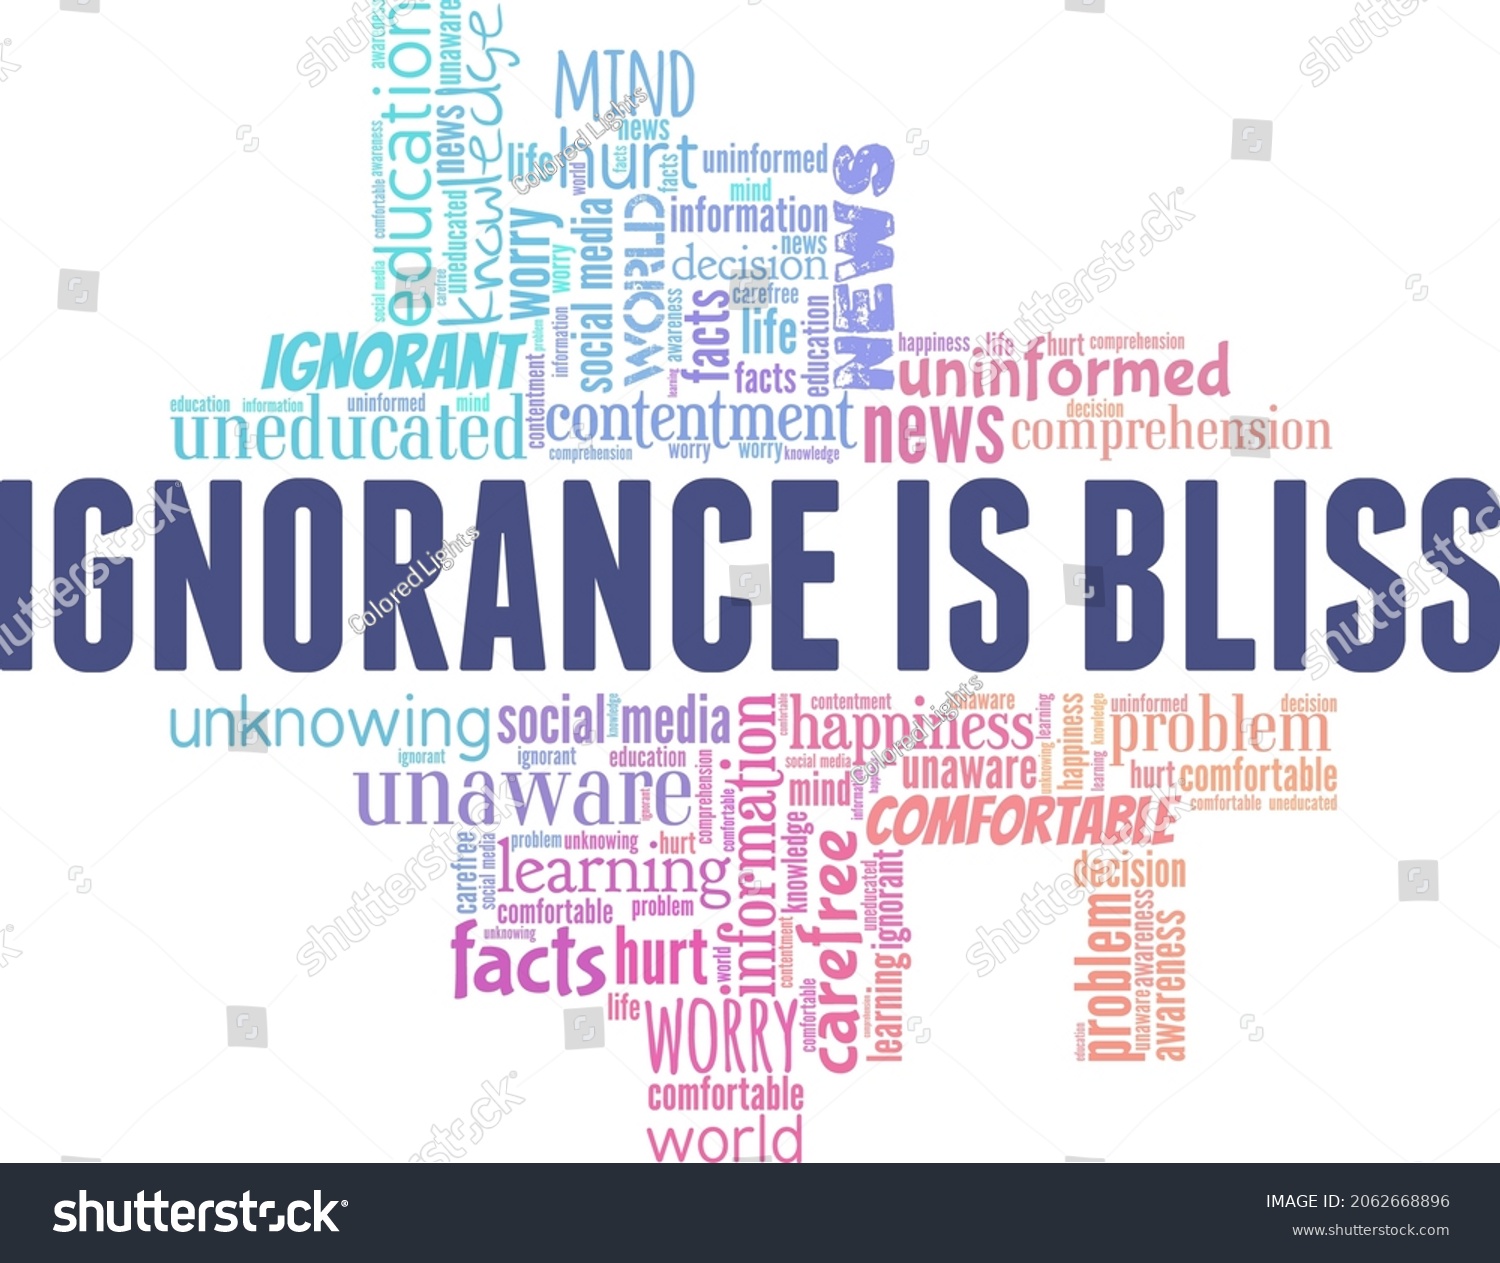 stock-vector-ignorance-is-bliss-vector-illustration-word-cloud-isolated-on-white-background-20...jpg